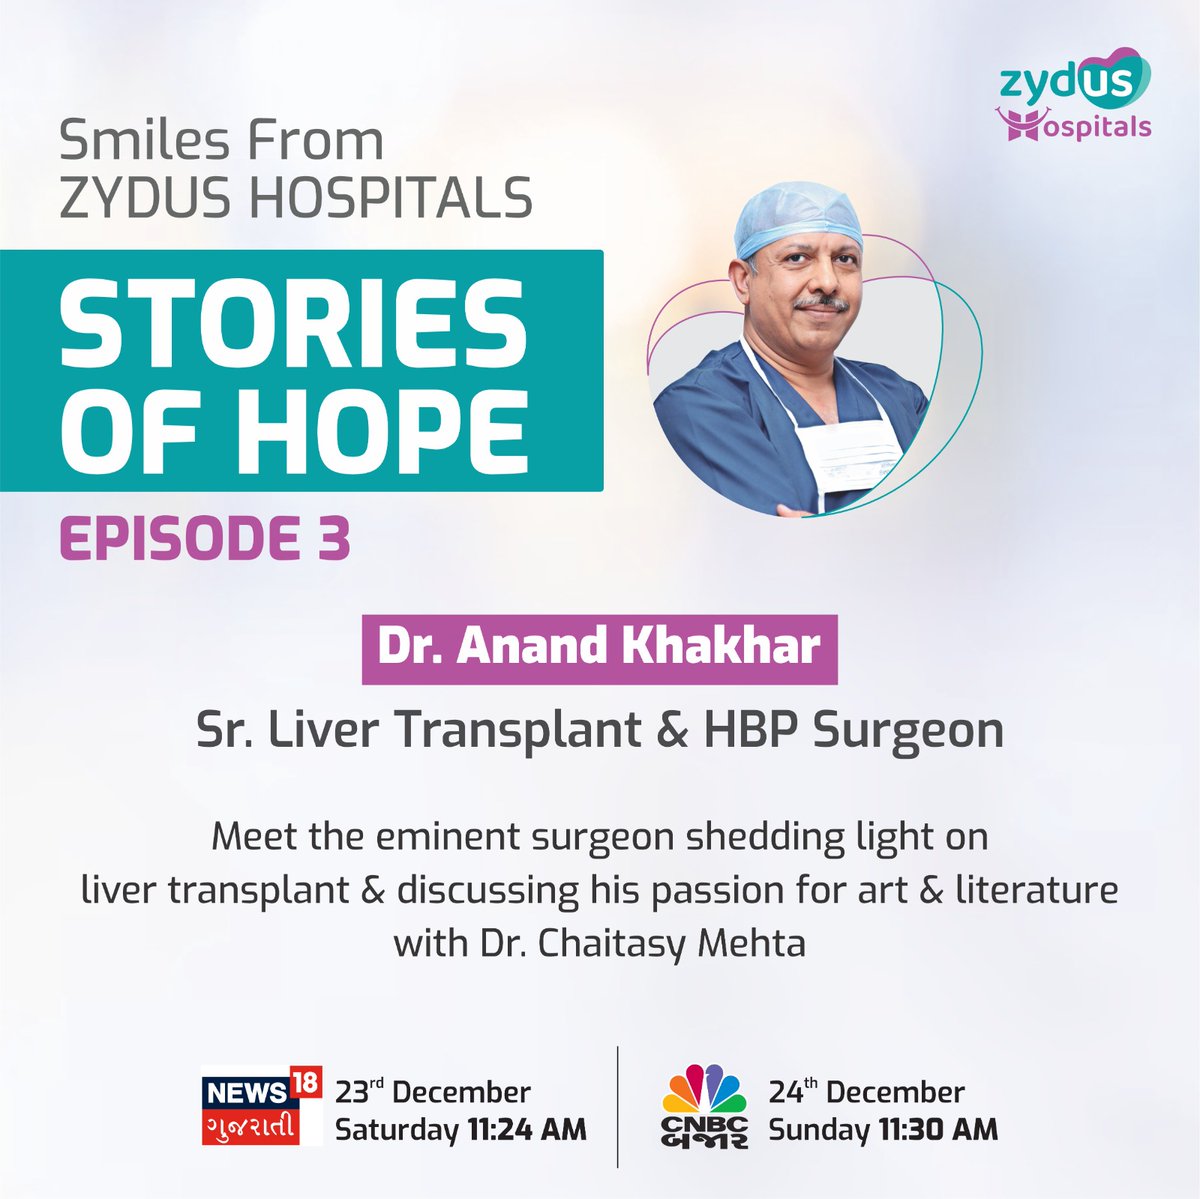 Catch Dr. Anand Khakhar, a Liver Transplant and HPB Surgeon, in an exclusive interview discussing challenging transplant cases and his love for literature. Don't miss the insightful conversation on News18 Gujarati, Dec 23, 11:24 AM, and CNBC Bazaar, Dec 24, 11:30 AM.